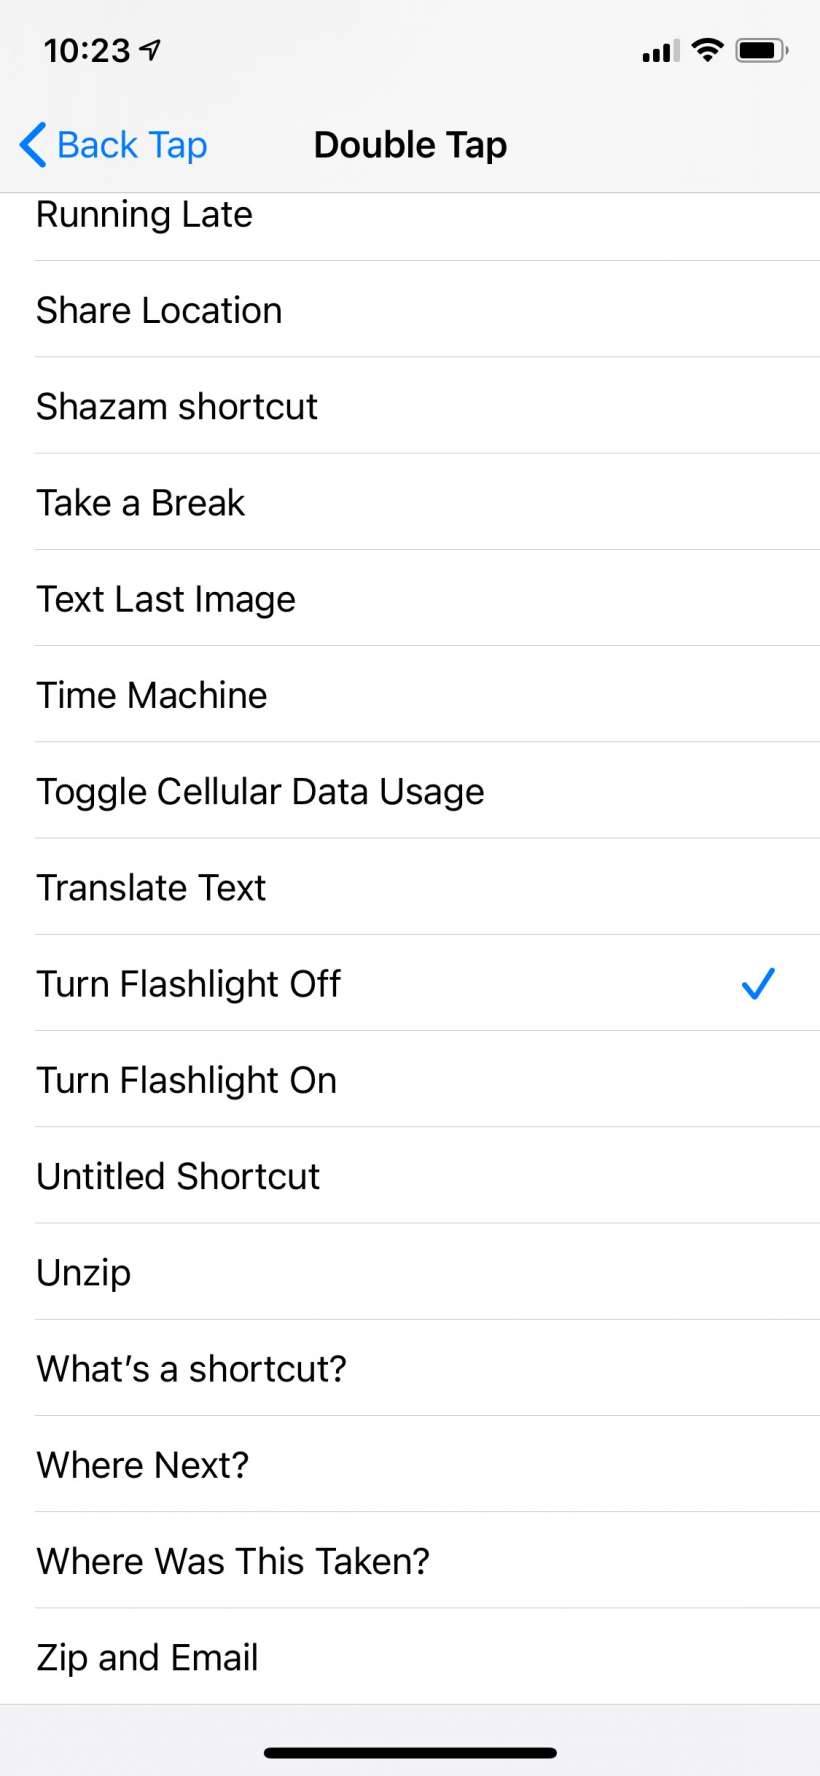 How to set flashlight as a Back Tap function on iPhone in iOS 14.